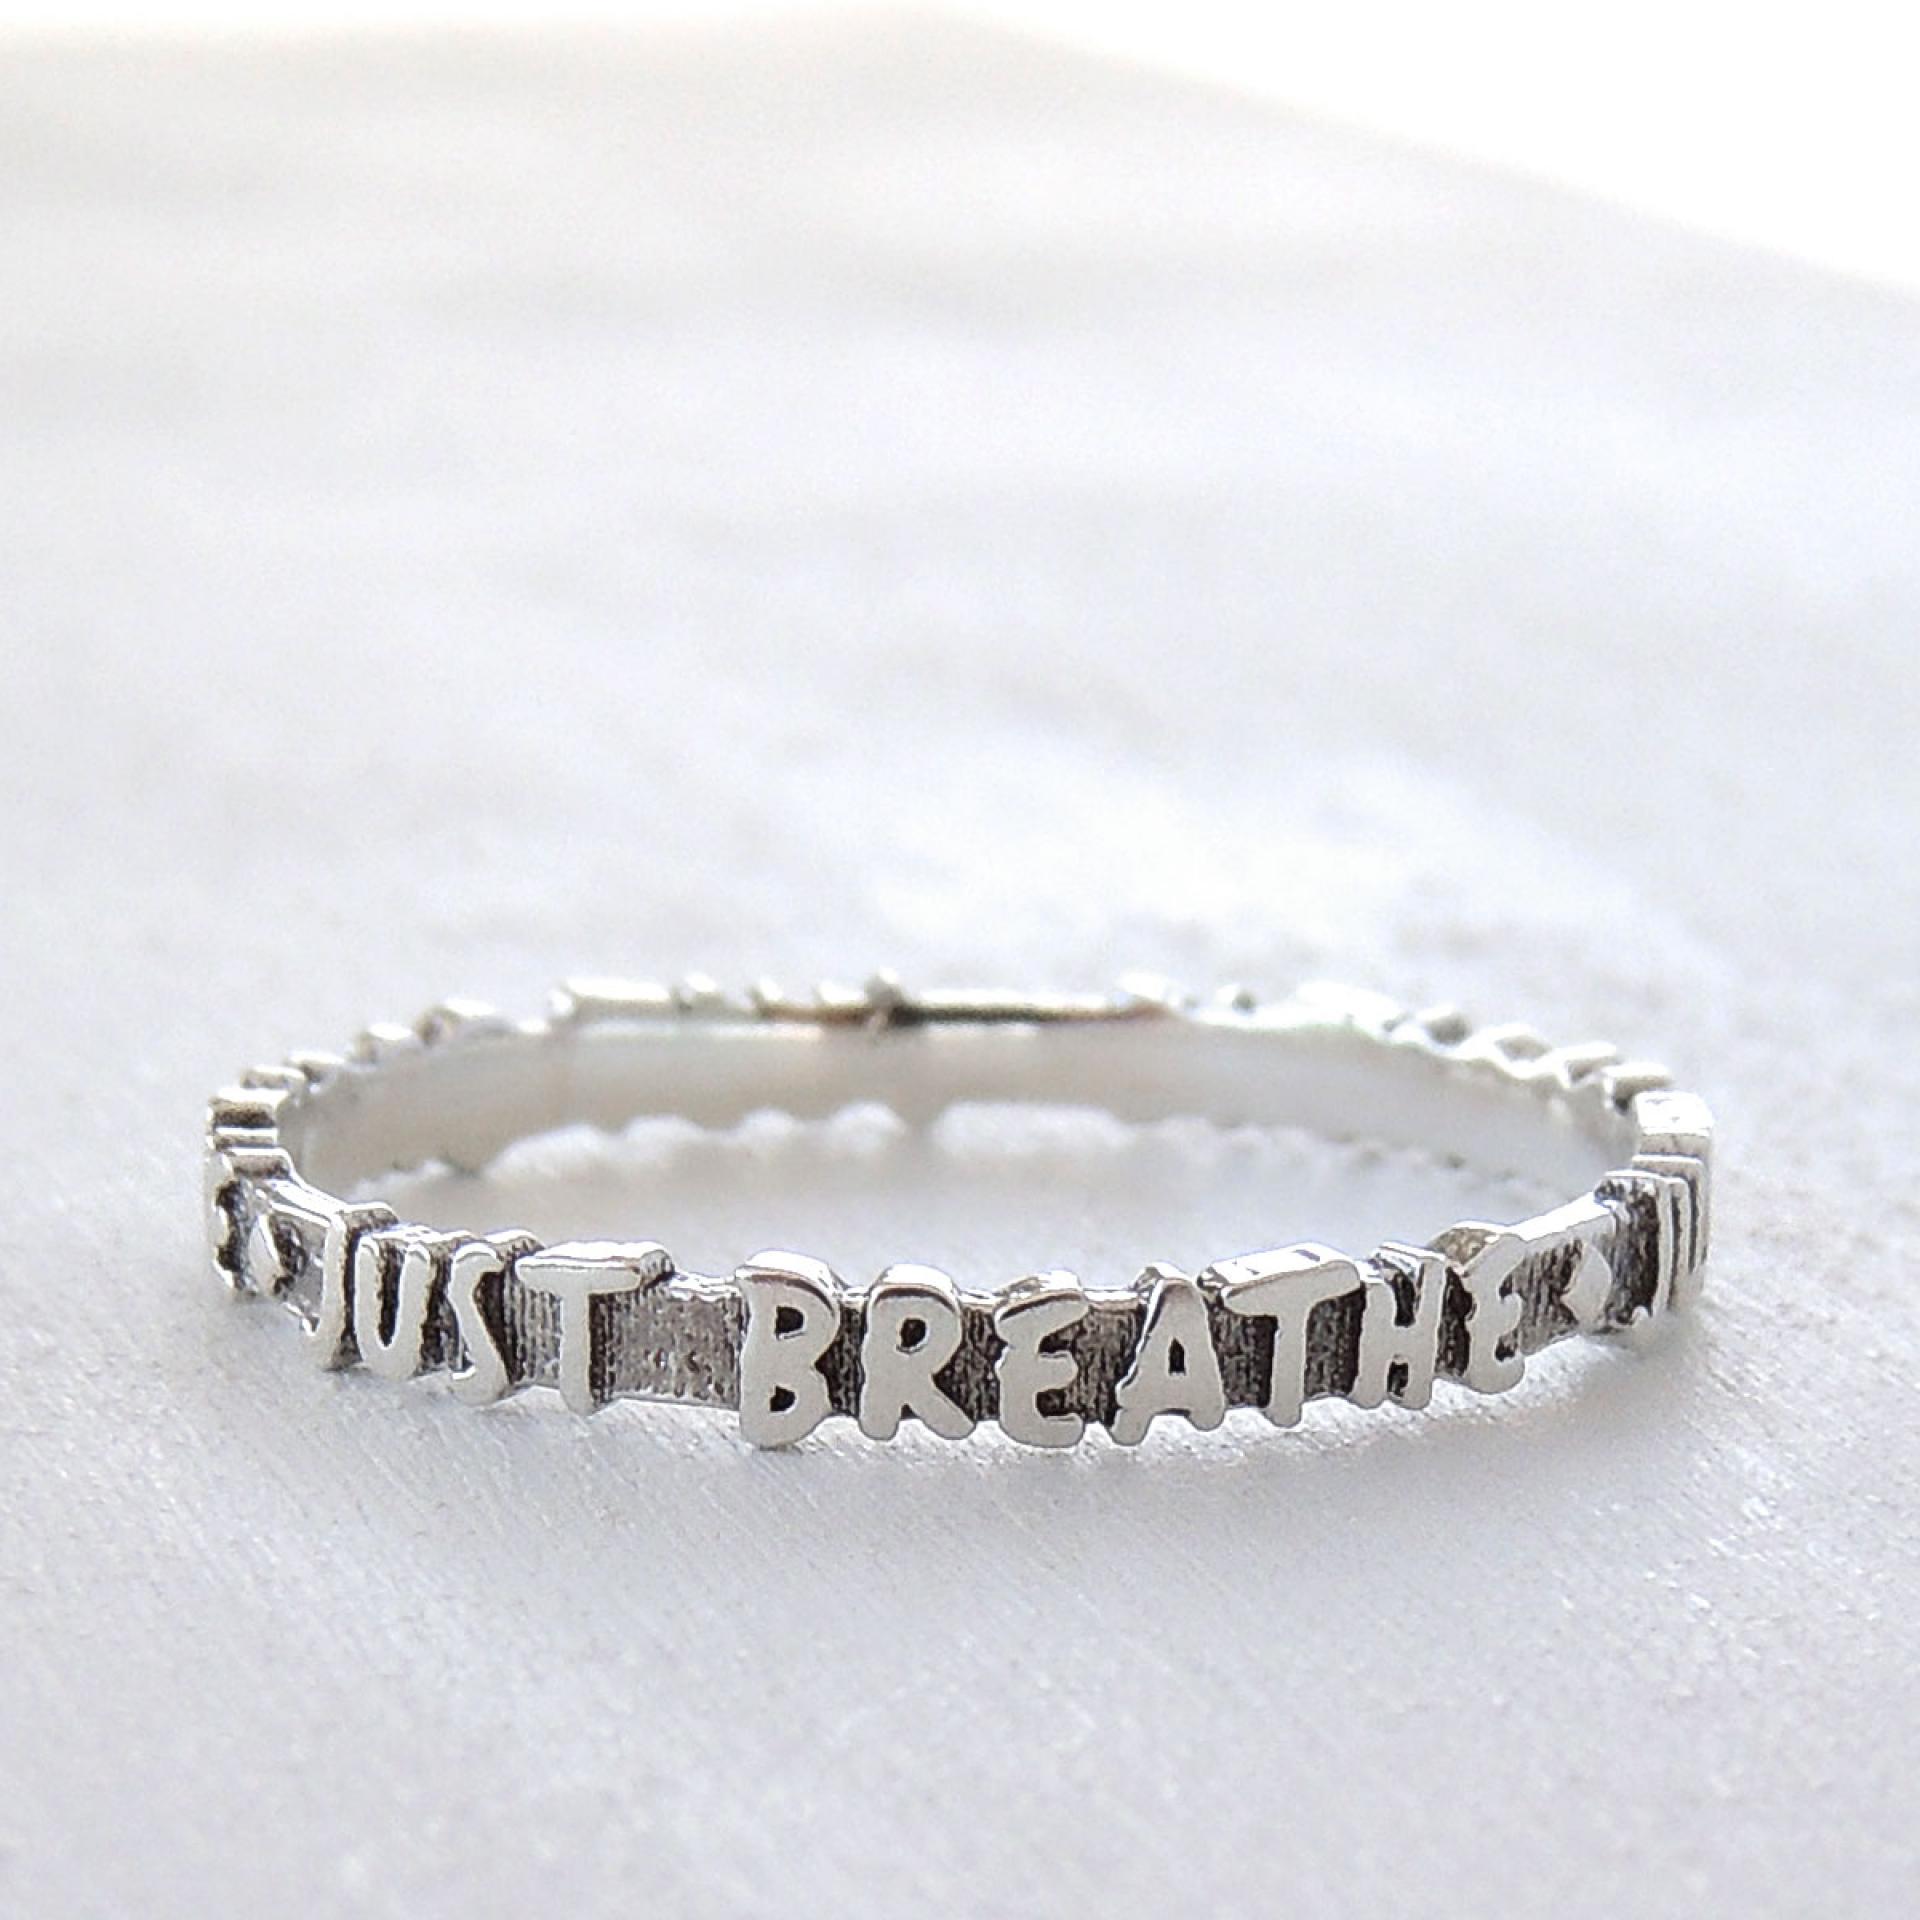 Just Breathe Self-care Mantra Ring 